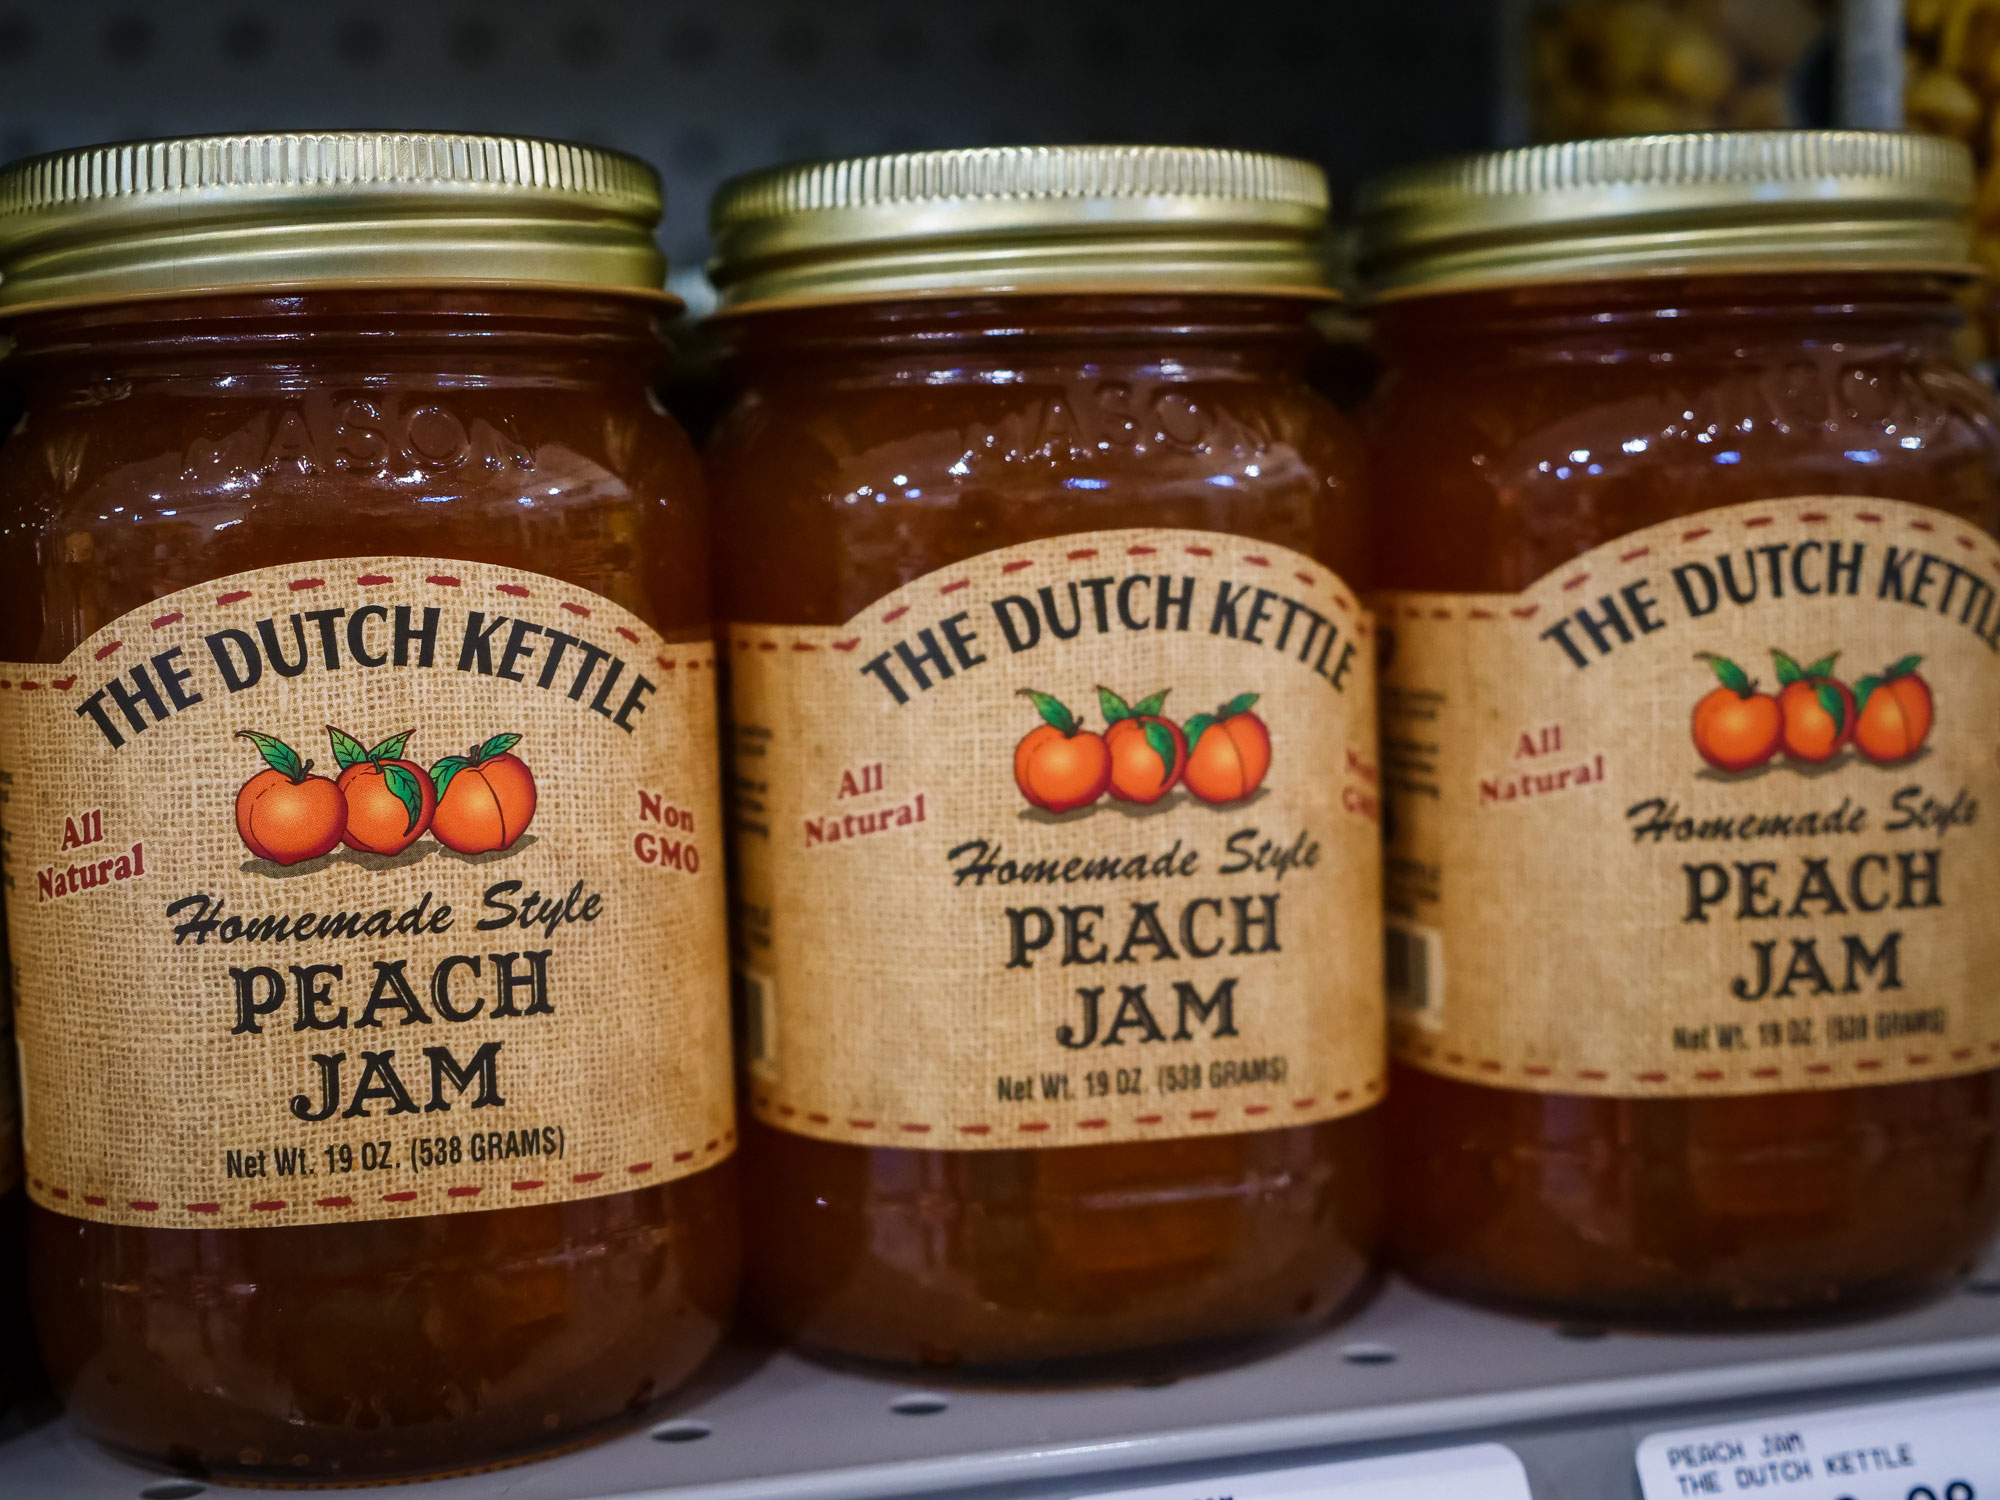 the dutch kettle peach jam at lowry's store in harmony, nc